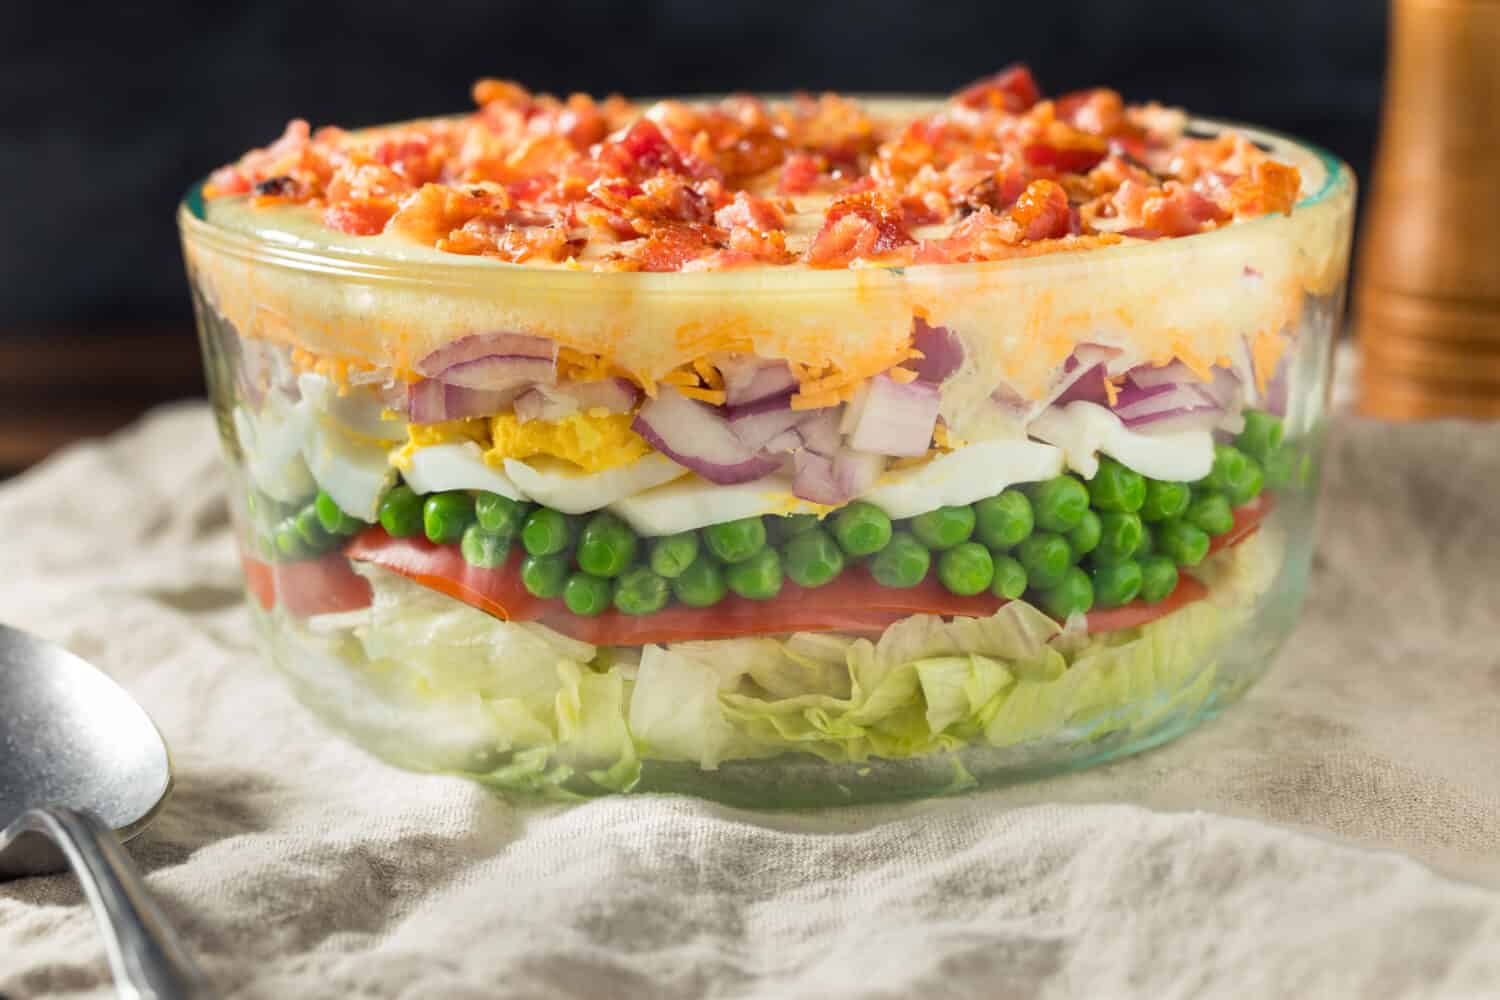 Homemade Seven Layer Salad with Eggs Bacon Peas and Lettuce